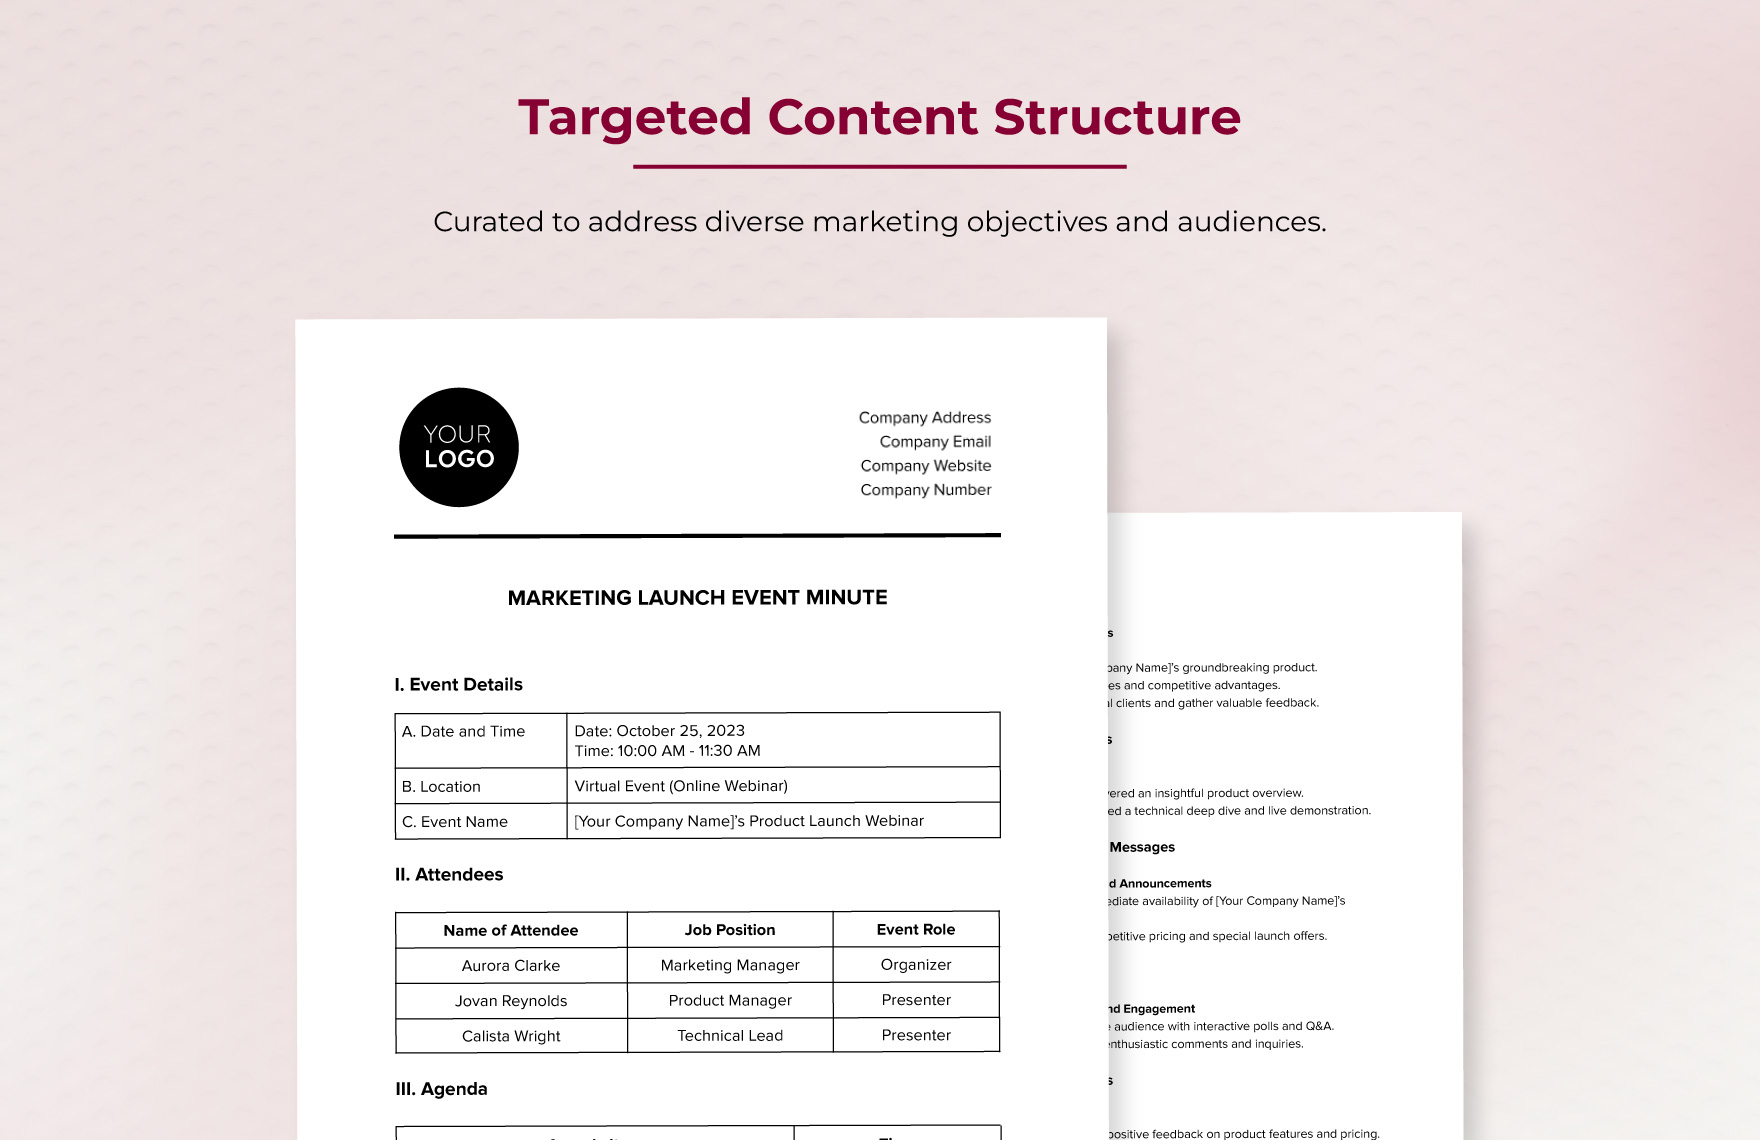 Marketing Launch Event Minute Template